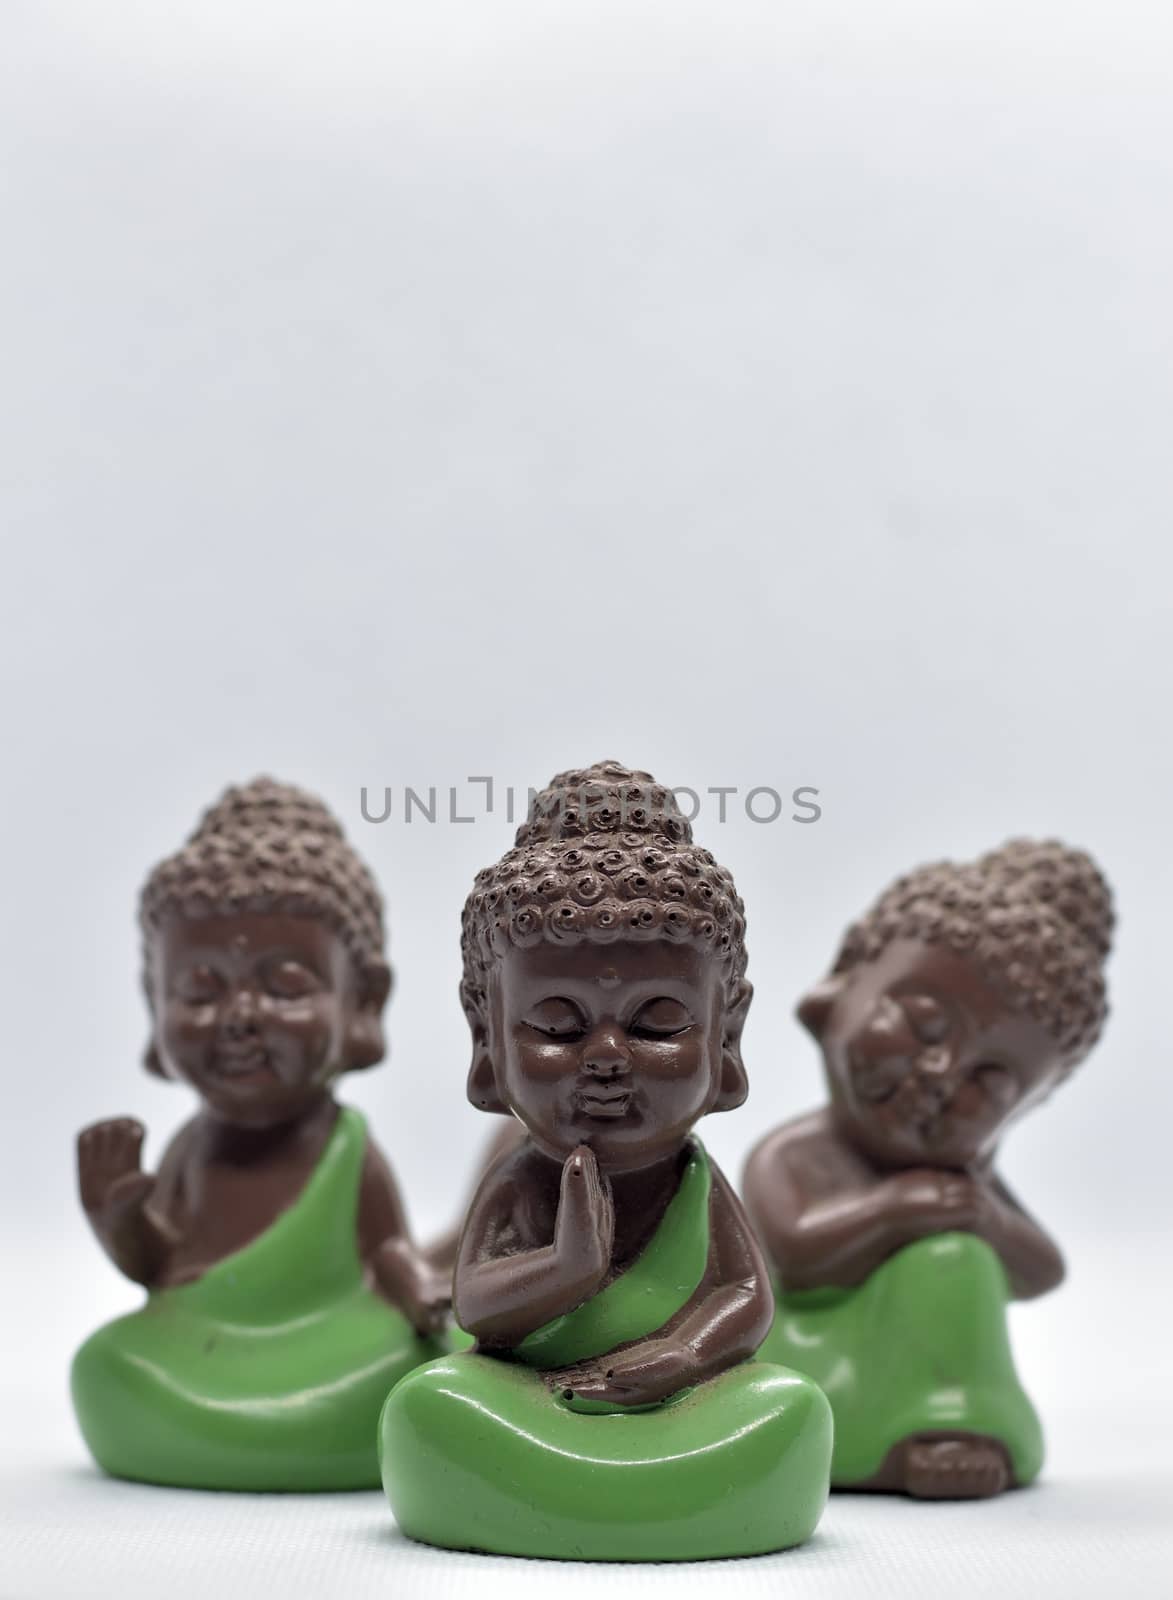 One monk and two more cute monk figures attract attention and also meaningful with modern simplicity